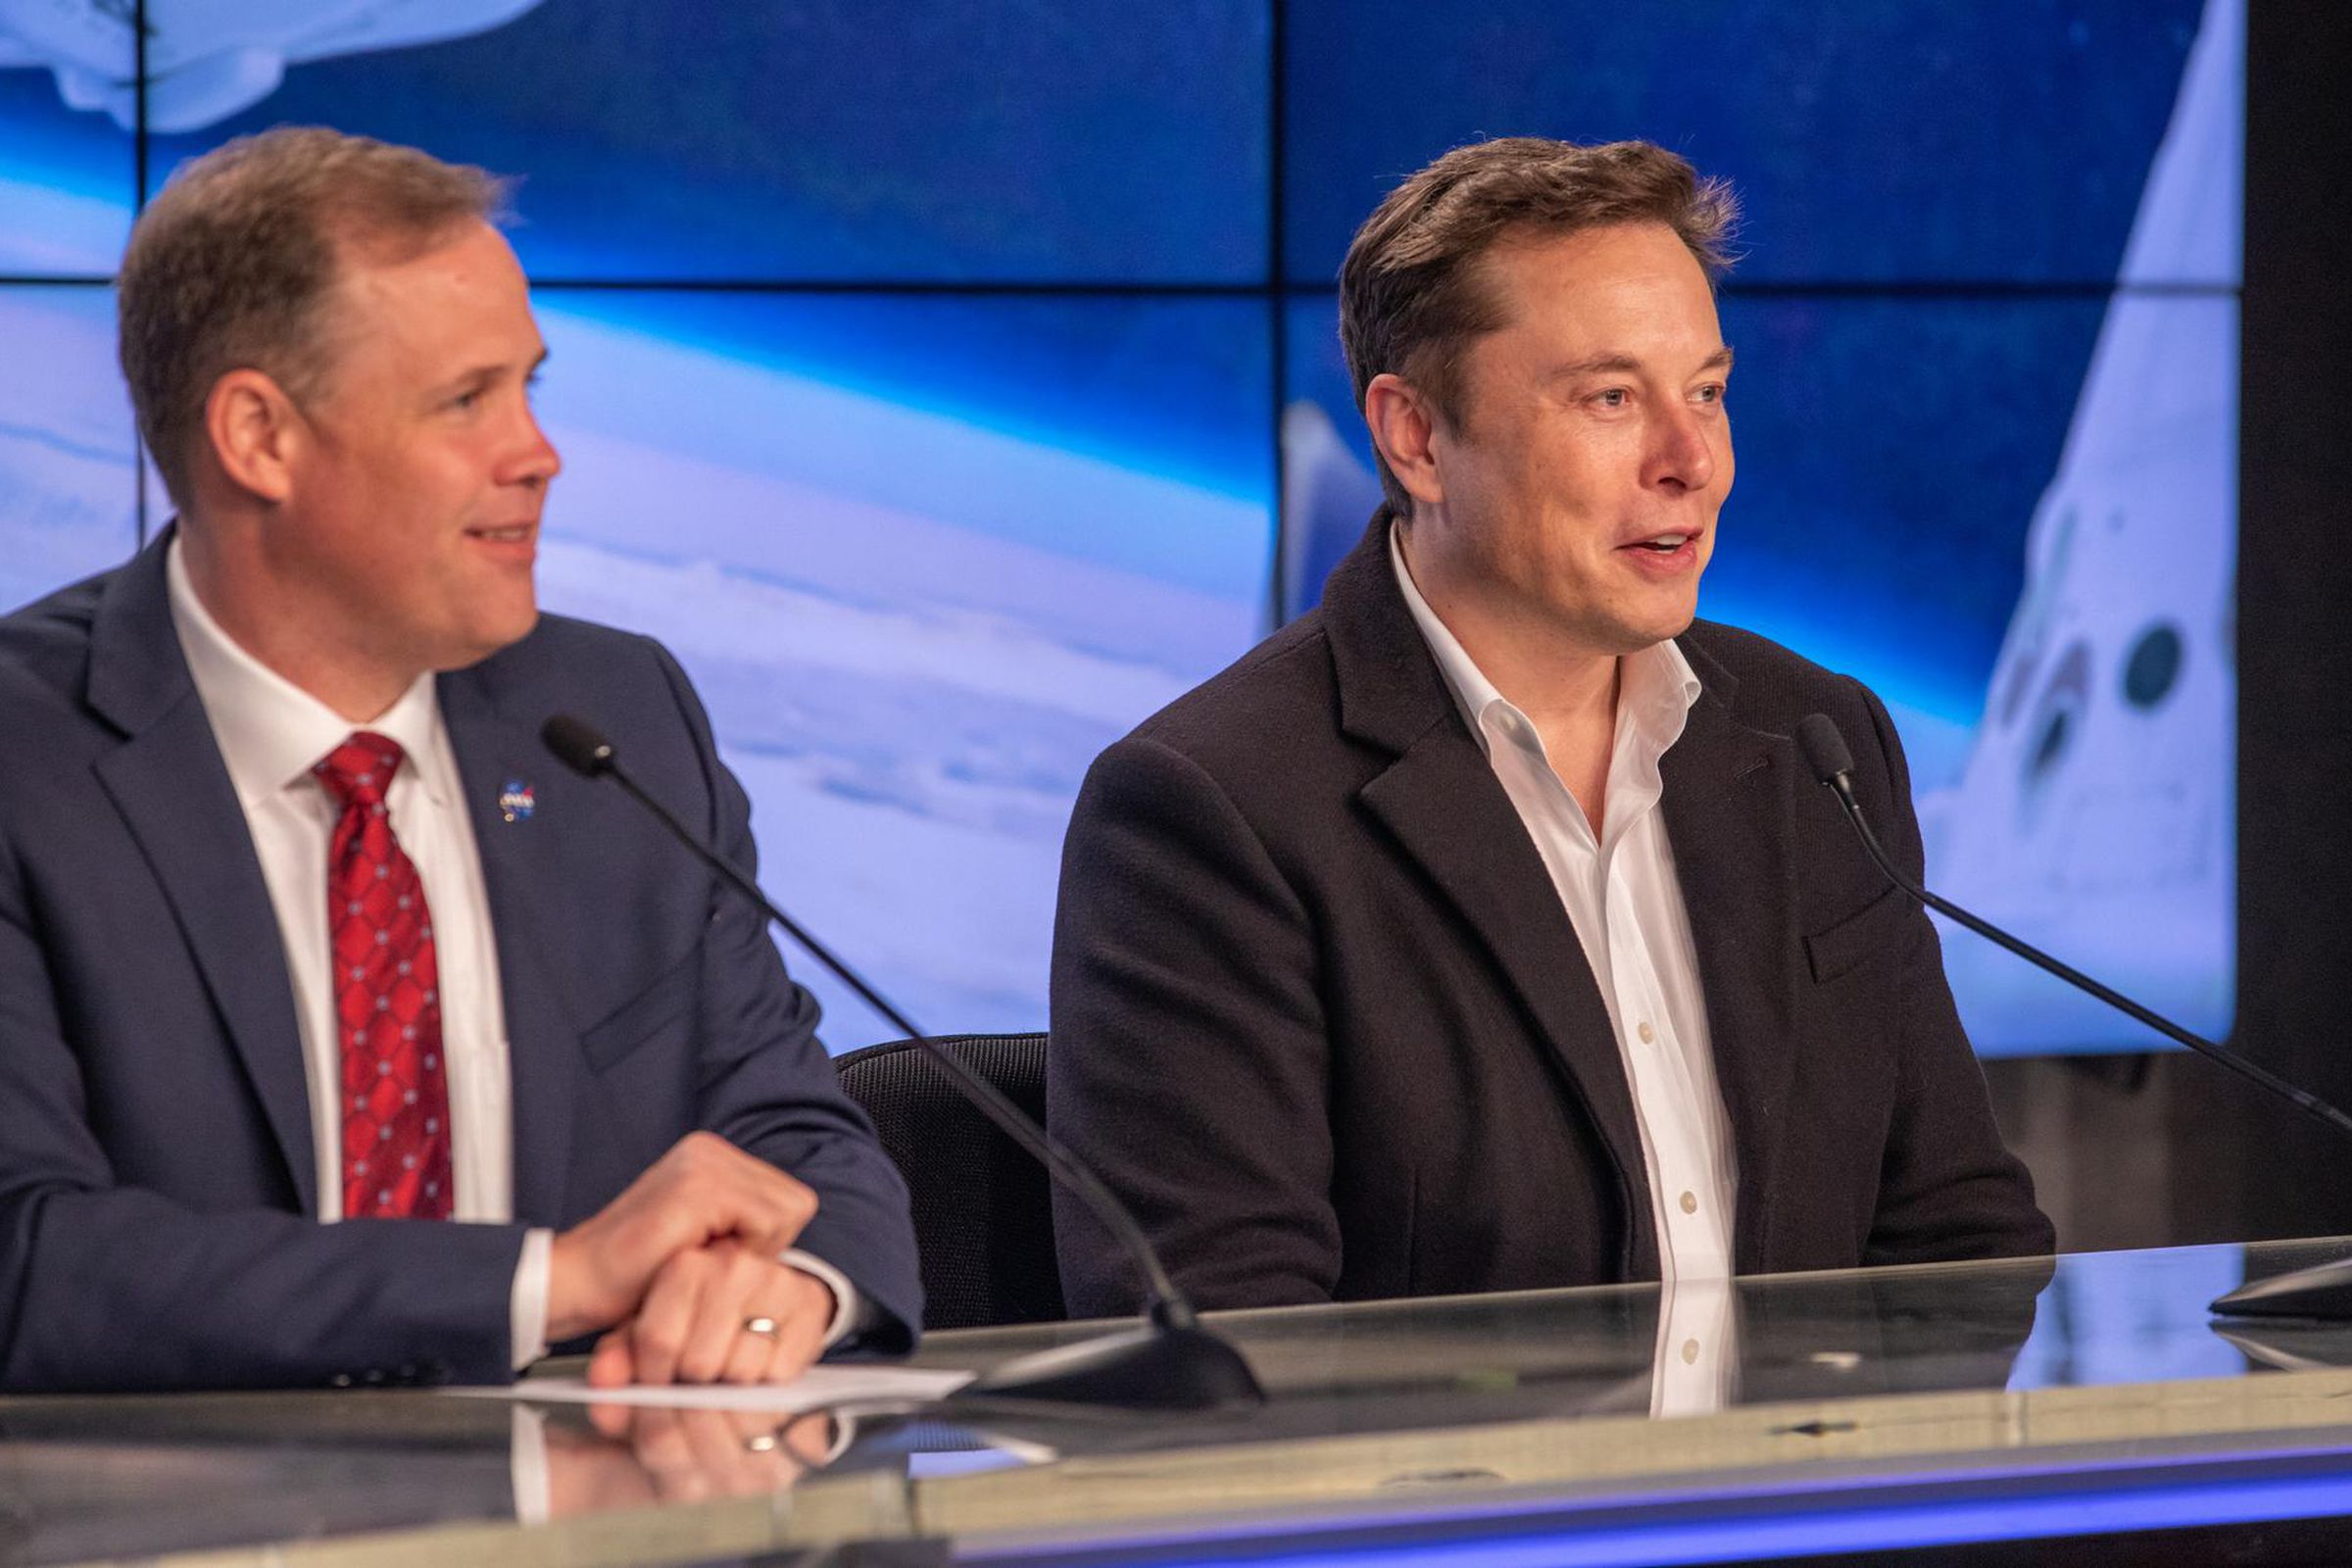 NASA administrator Jim Bridenstine (L) and Elon Musk (R) at SpaceX’s uncrewed test flight in March